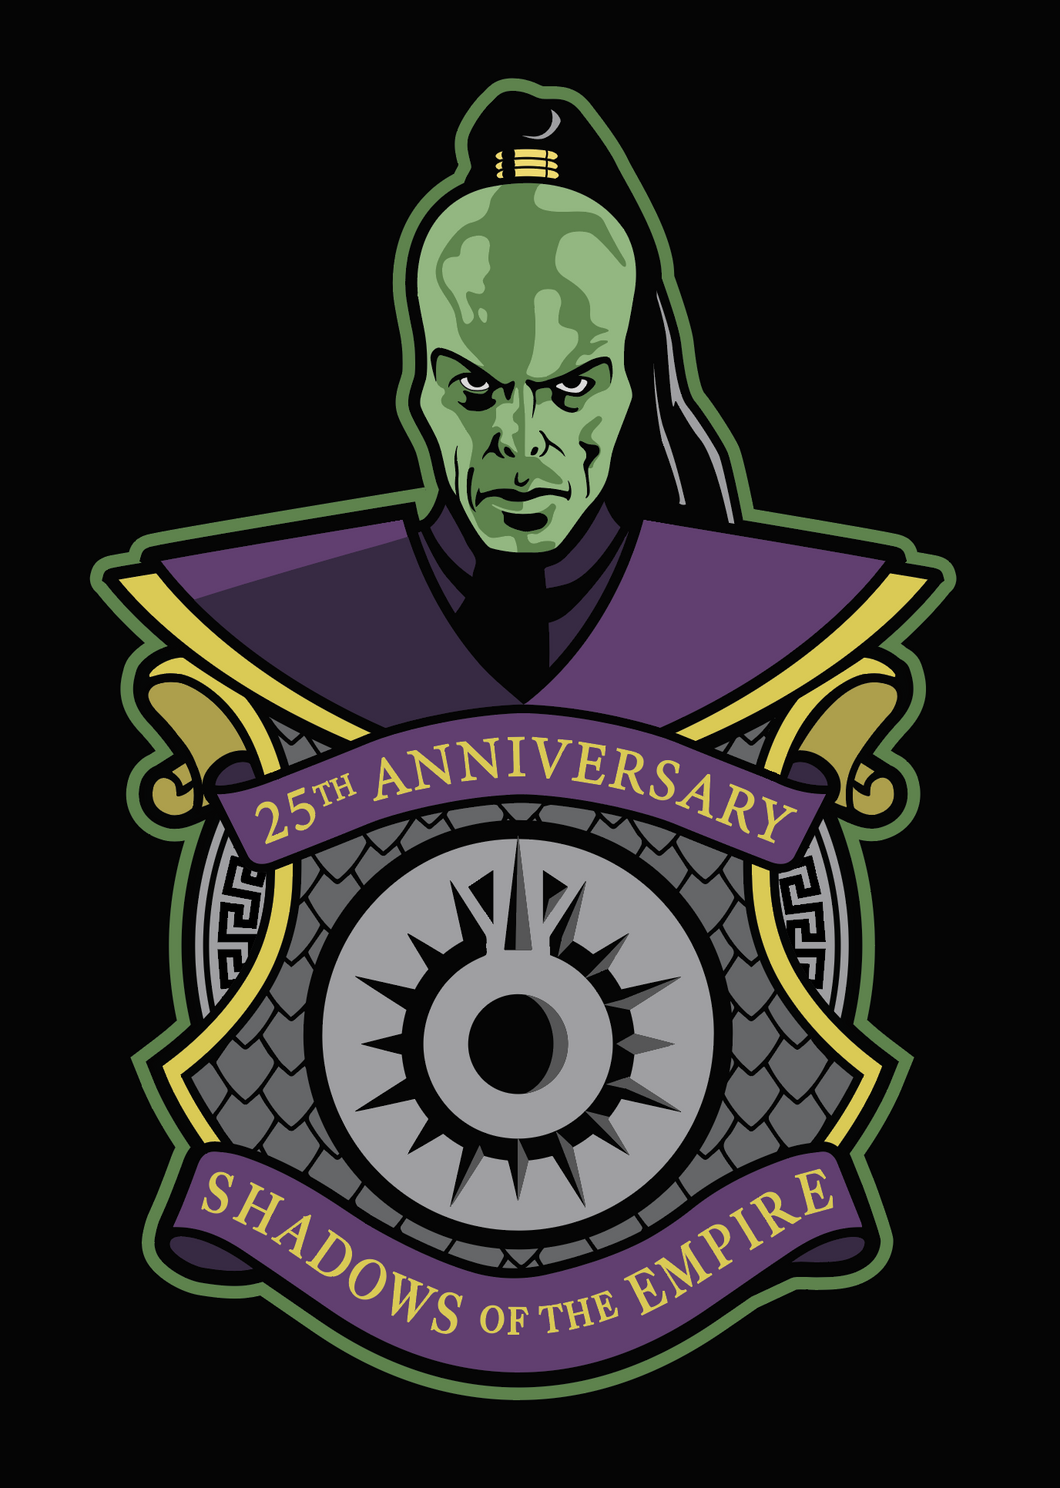 Xizor: Shadows of the Empire 25th Anniversary Patch